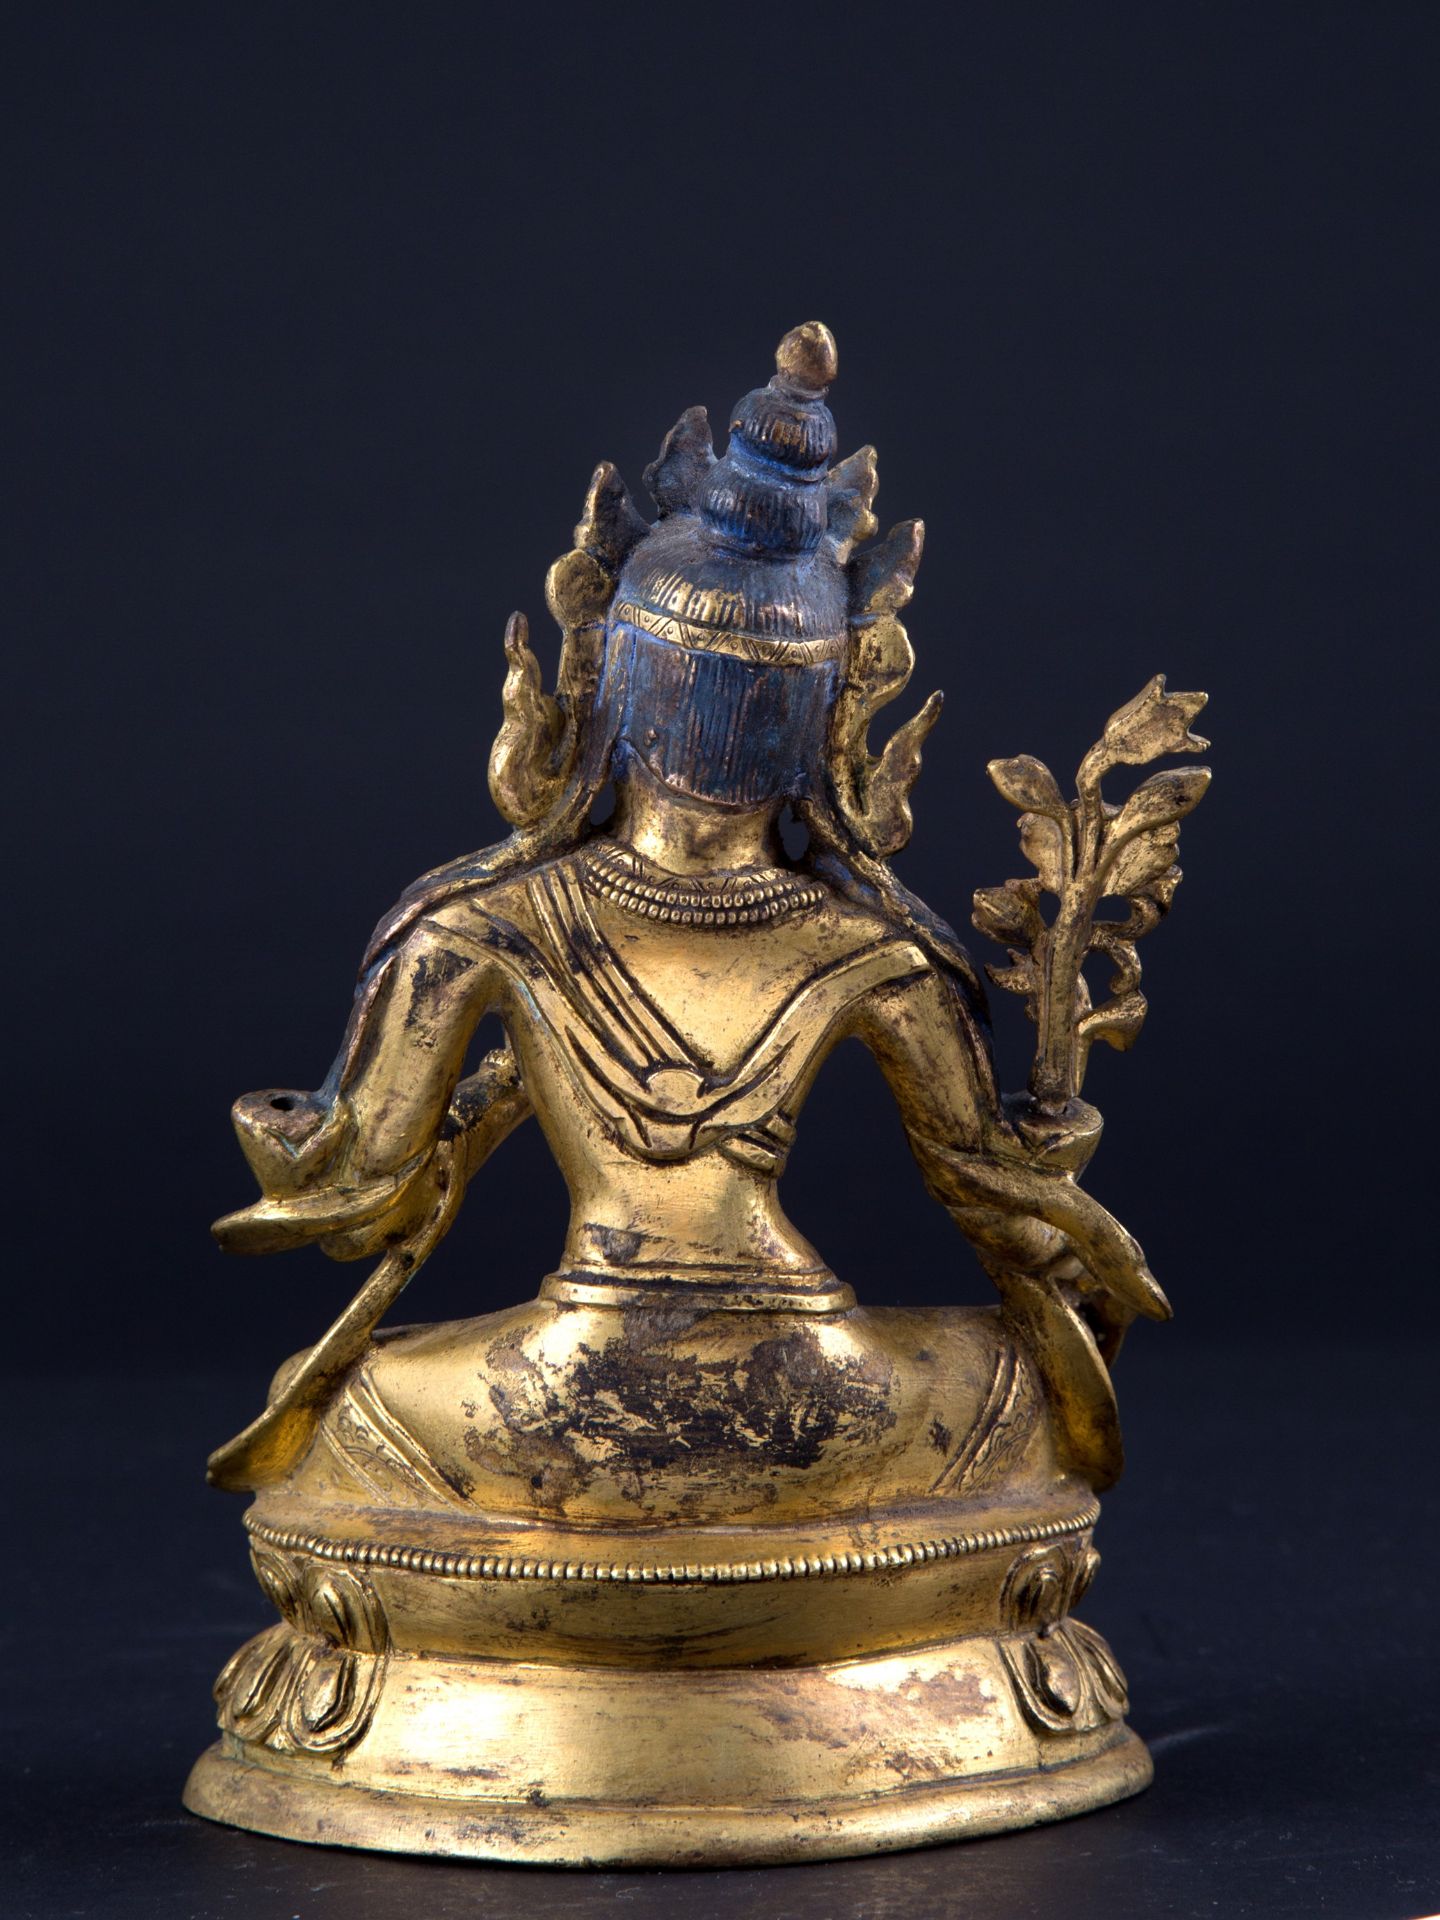 Sculpture "BUDDHA SITTING ON DOUBLE LOTUS FLOWER" - Image 4 of 5